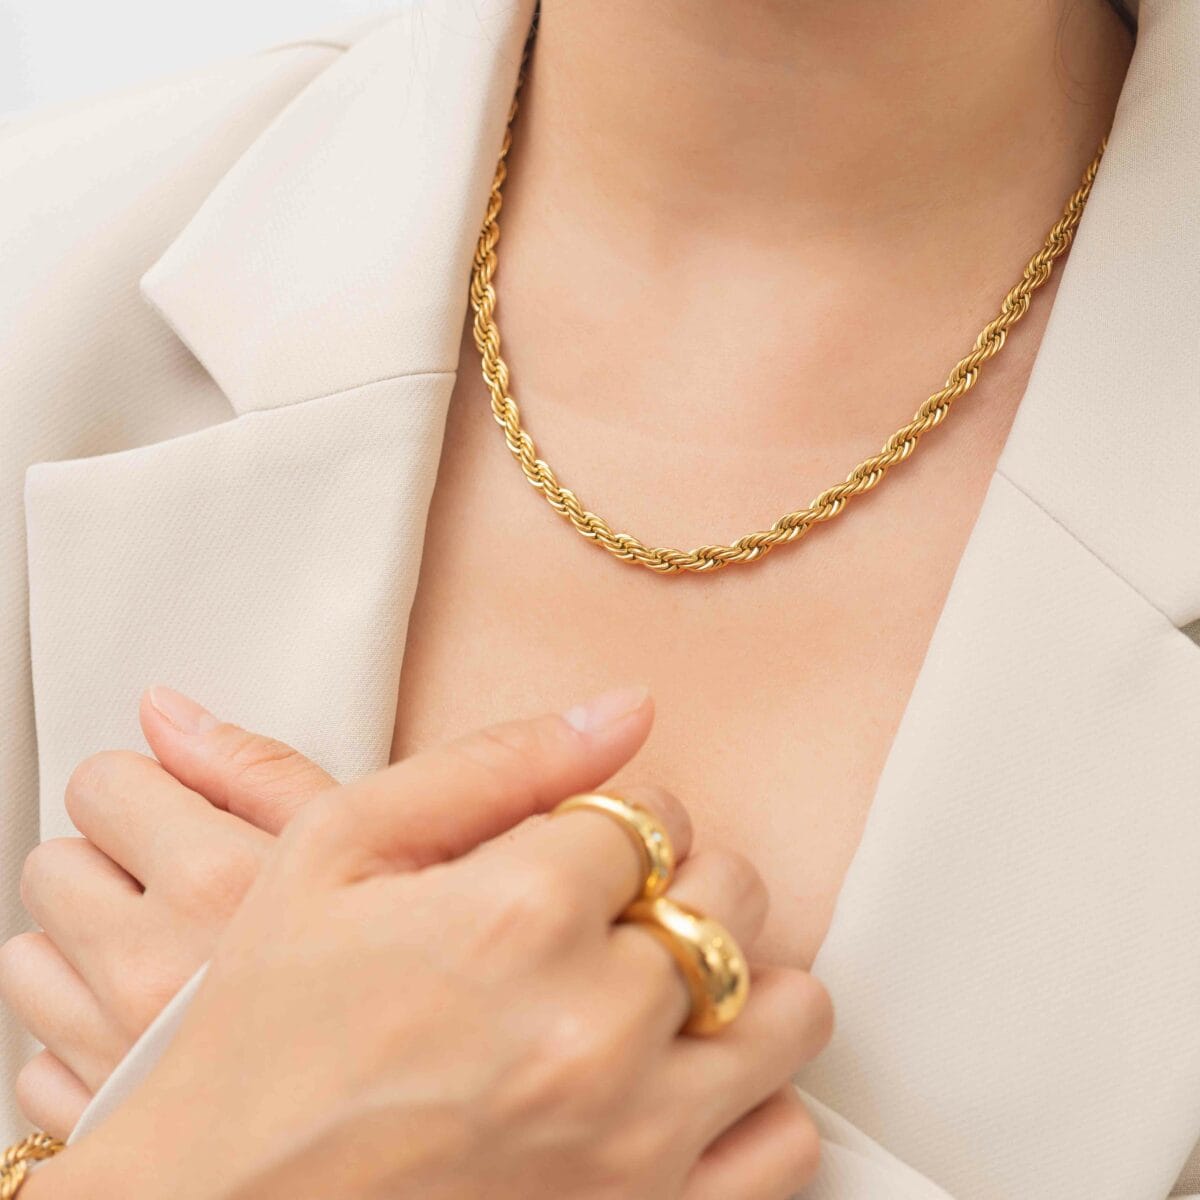 https://m.clubbella.co/product/bold-gold-rope-chain-necklace/ Resized (61 of 134)